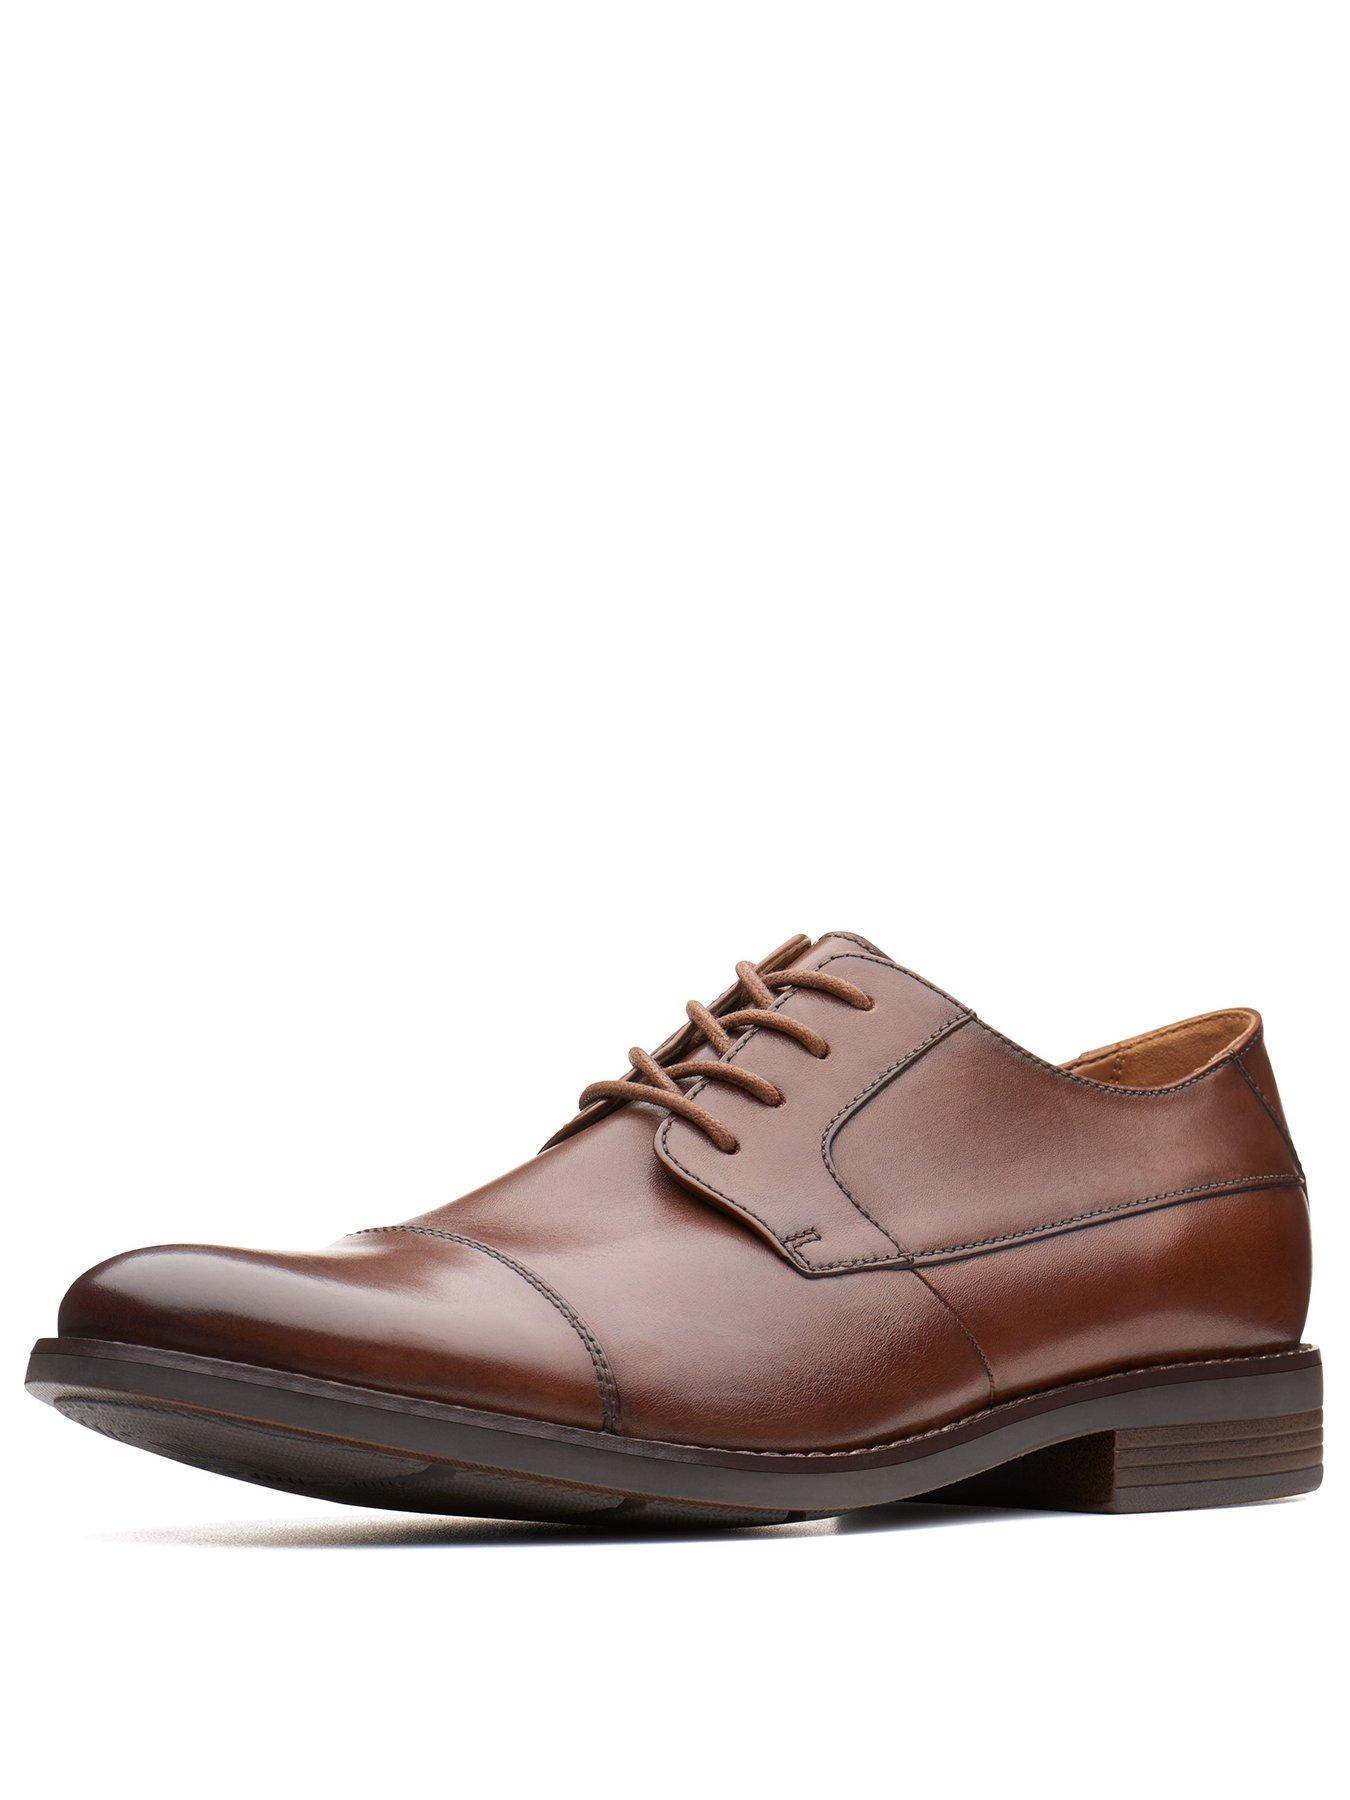 clarks brown oxford shoes 